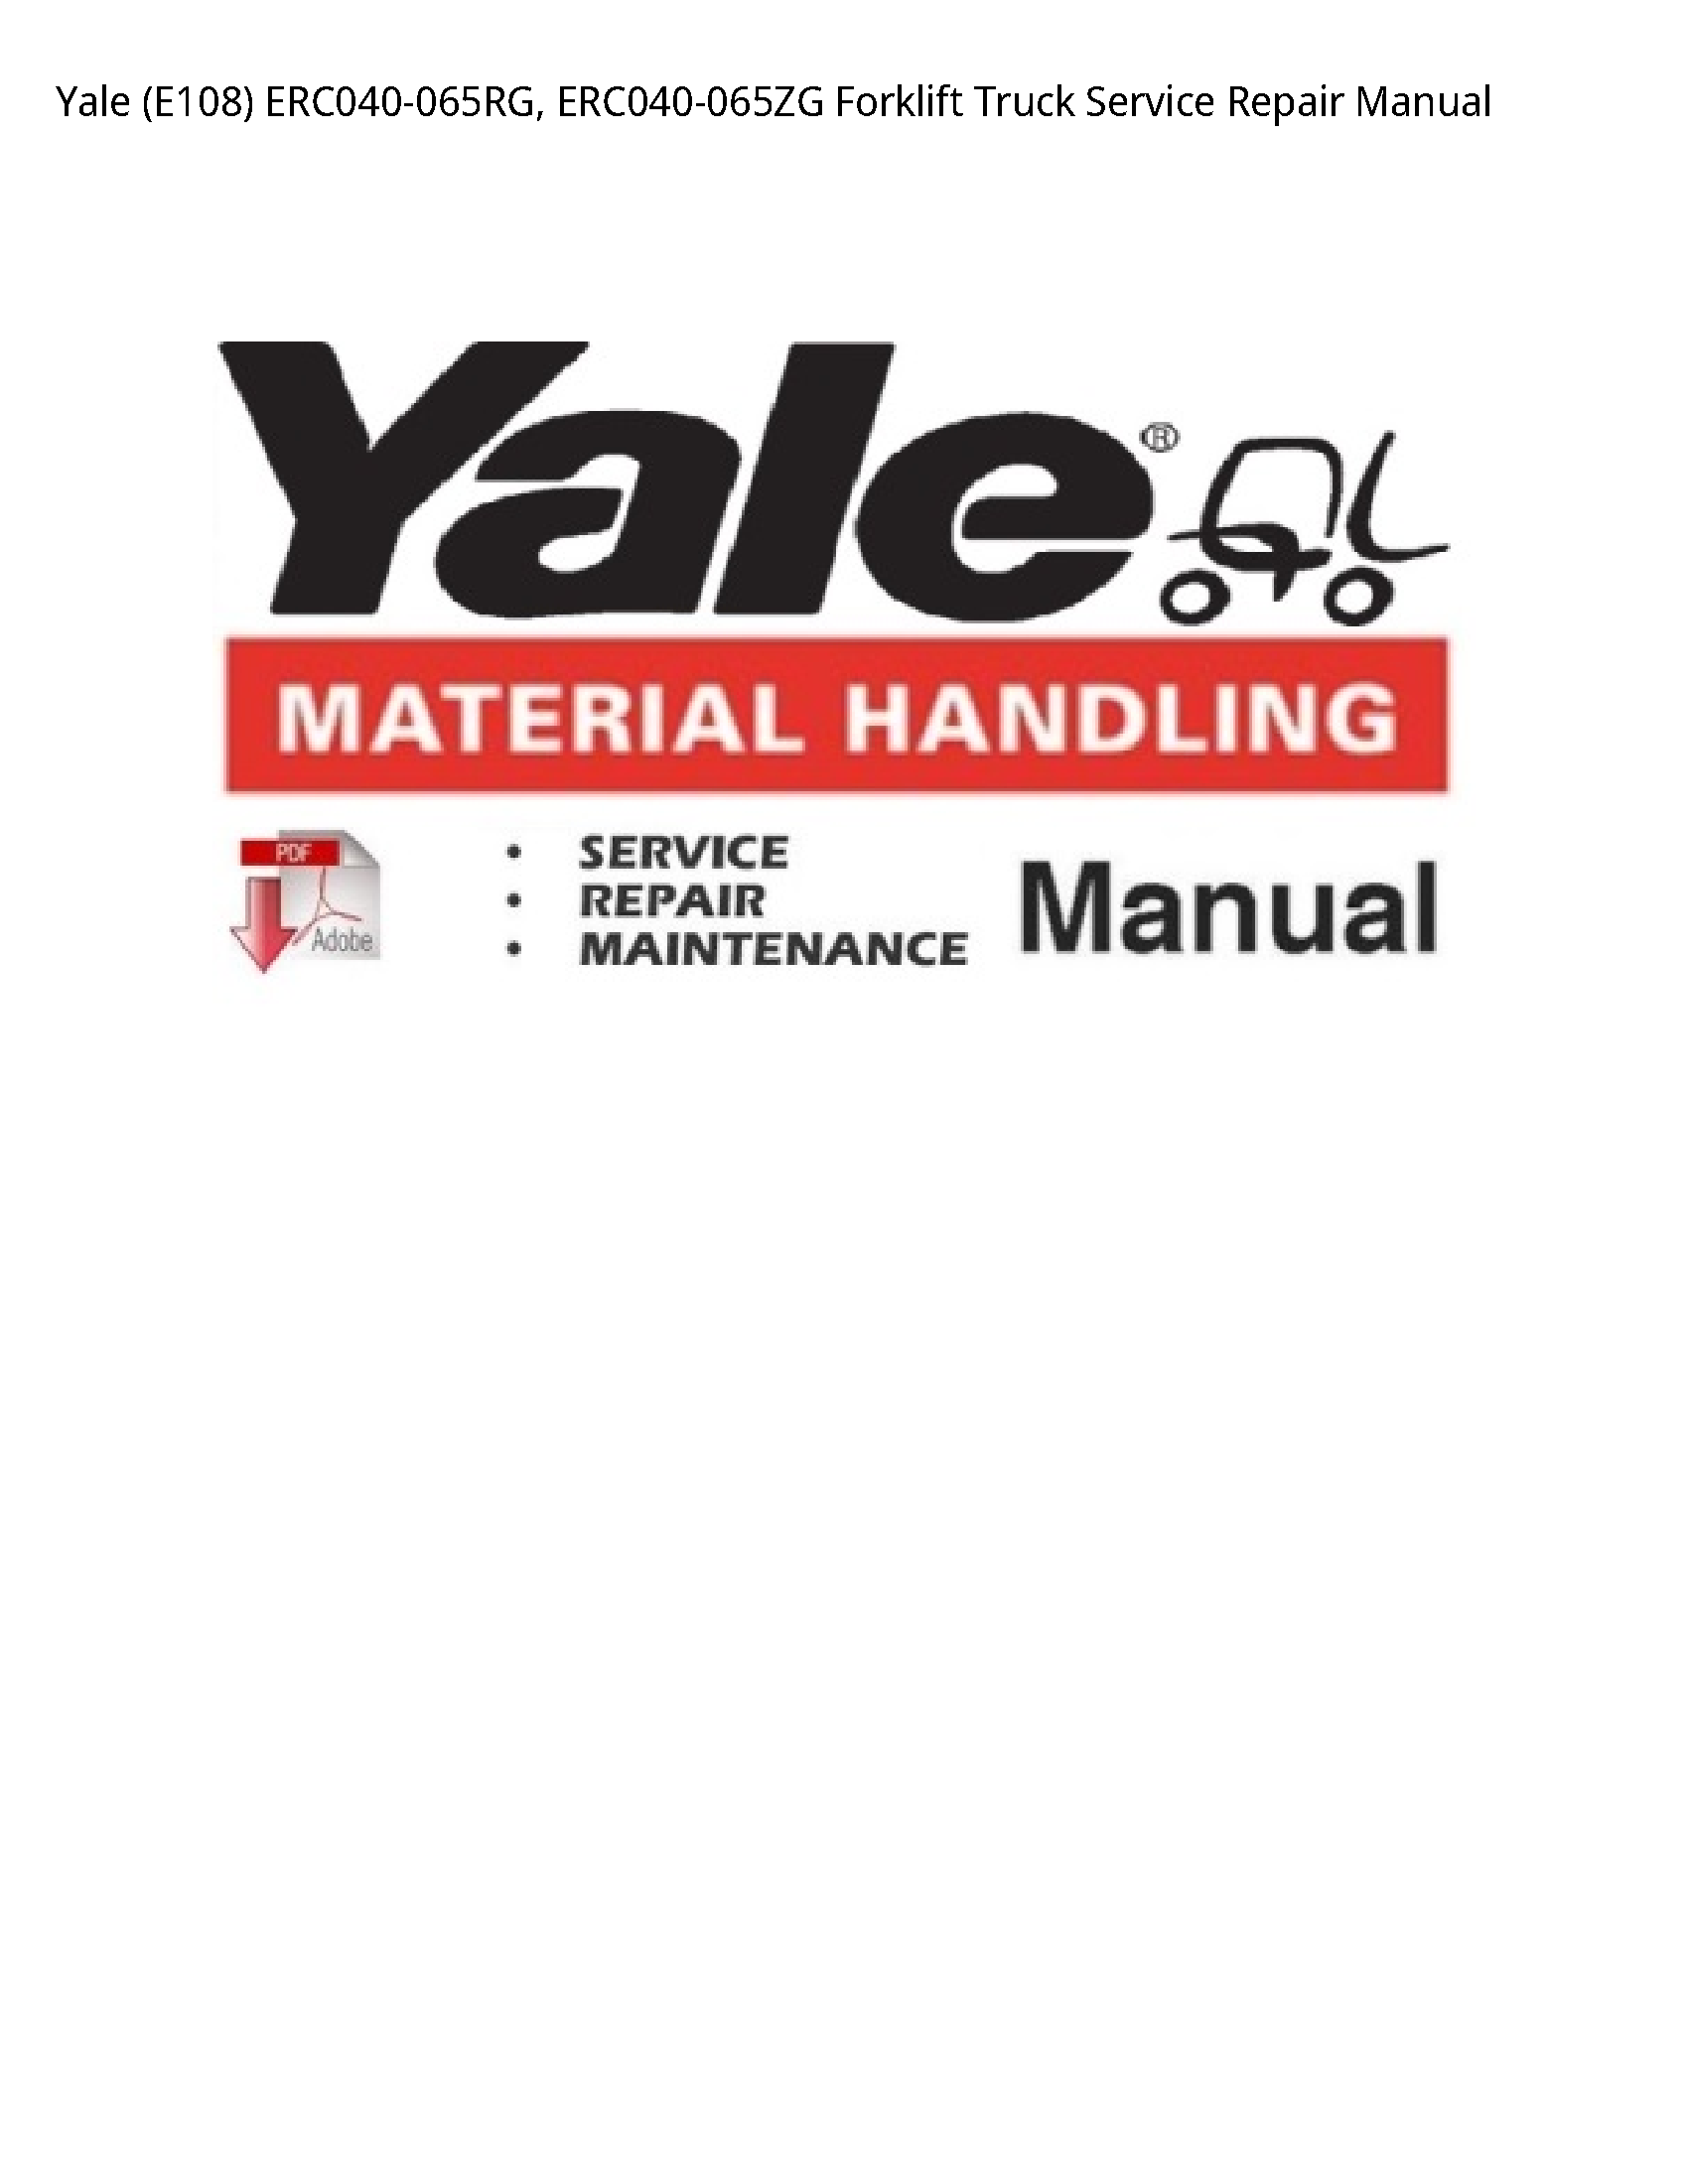 Yale (E108) Forklift Truck manual